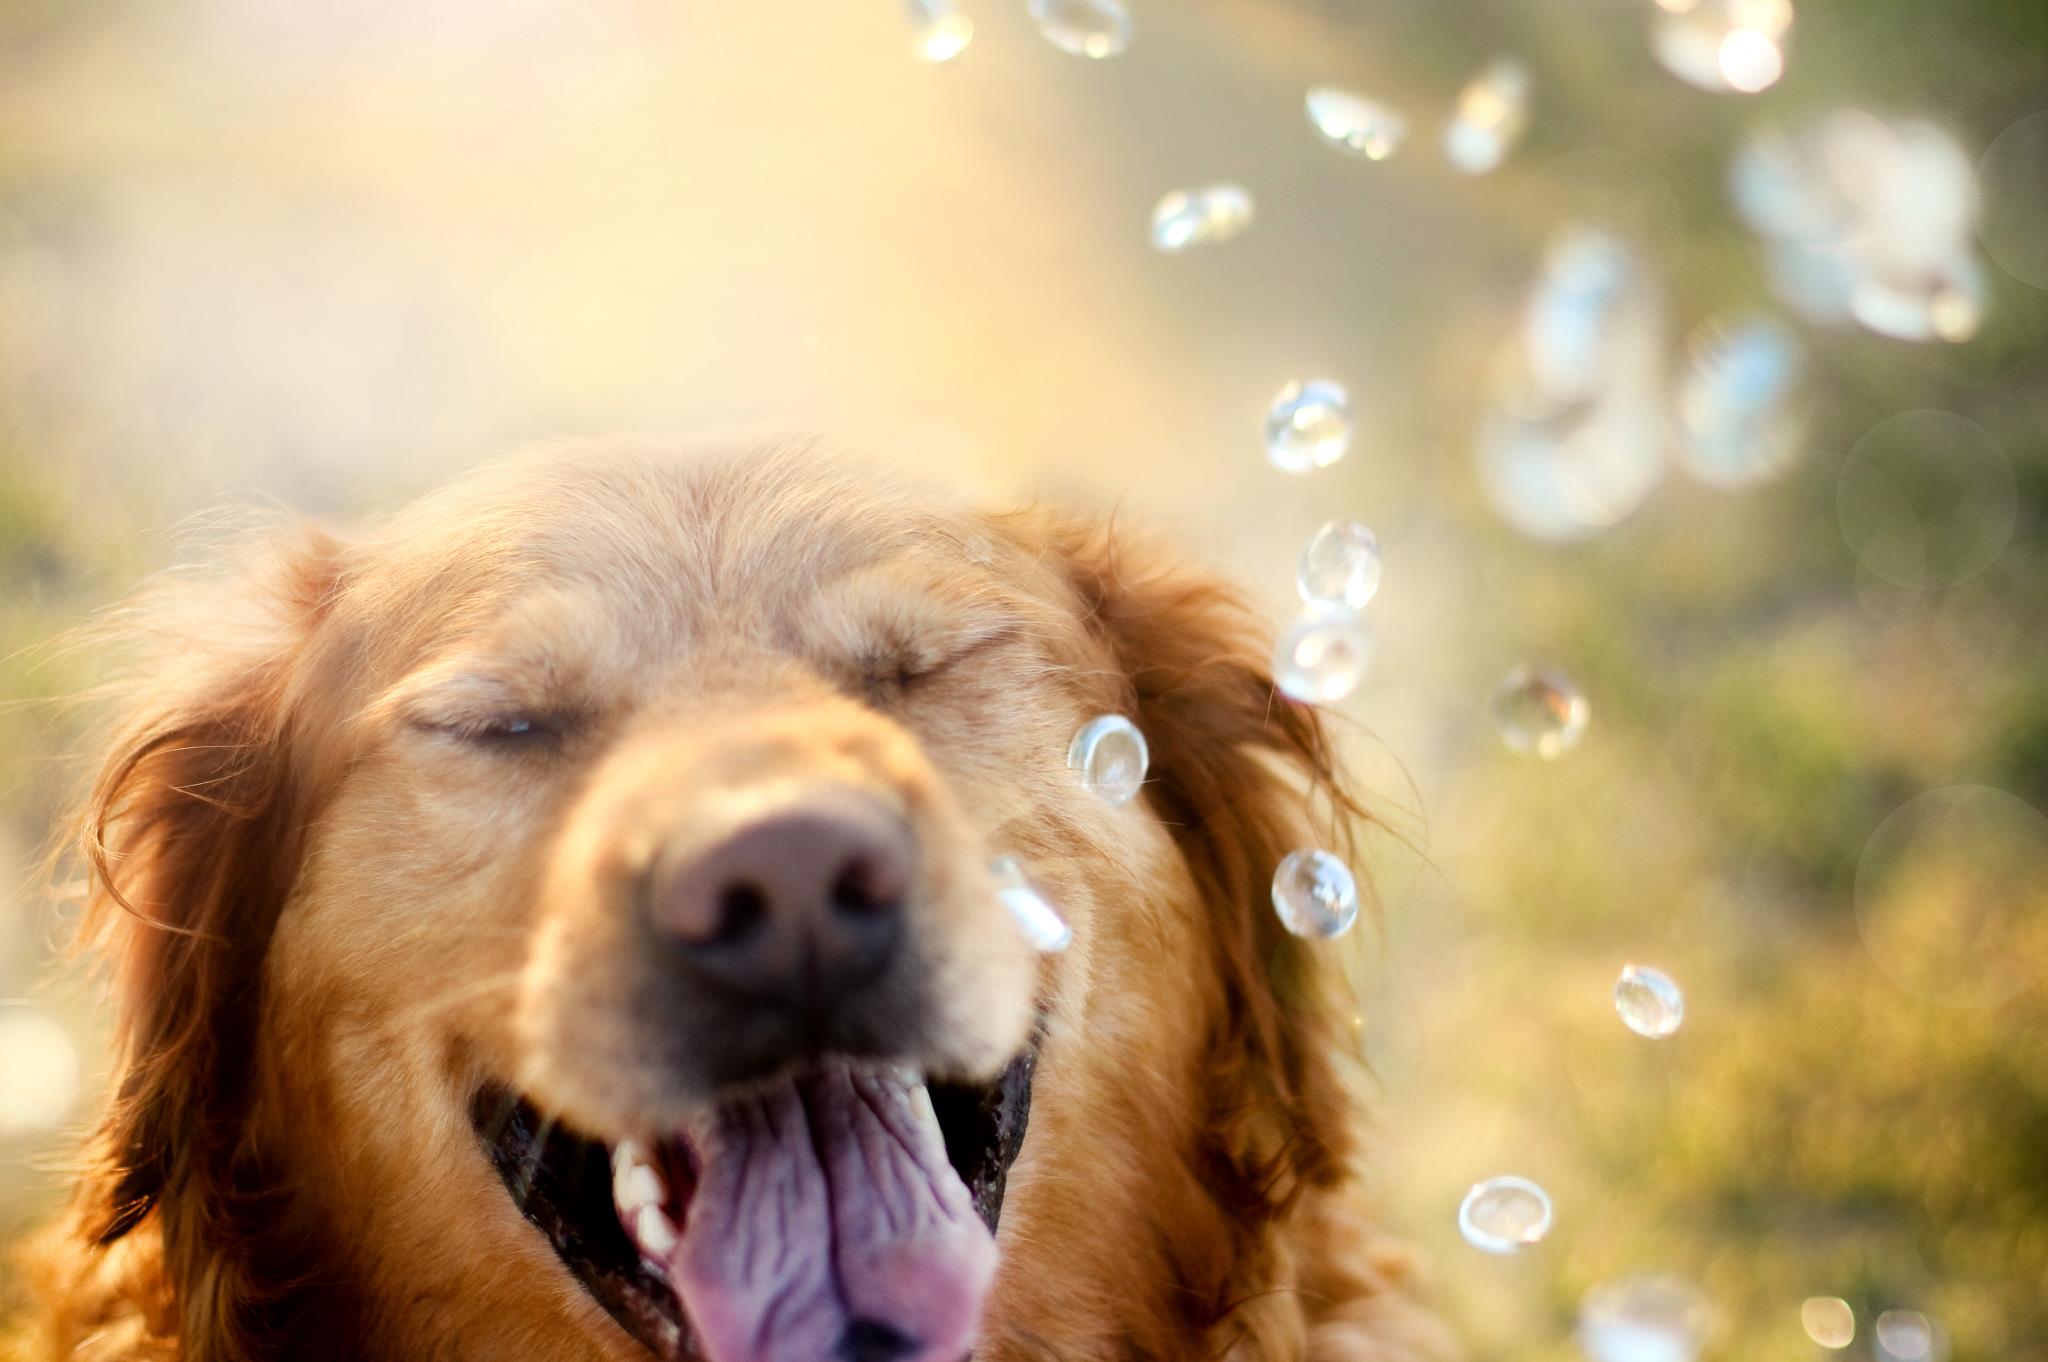 A Golden Retriever smiling with its eyes closed and with water droplets falling in front of him